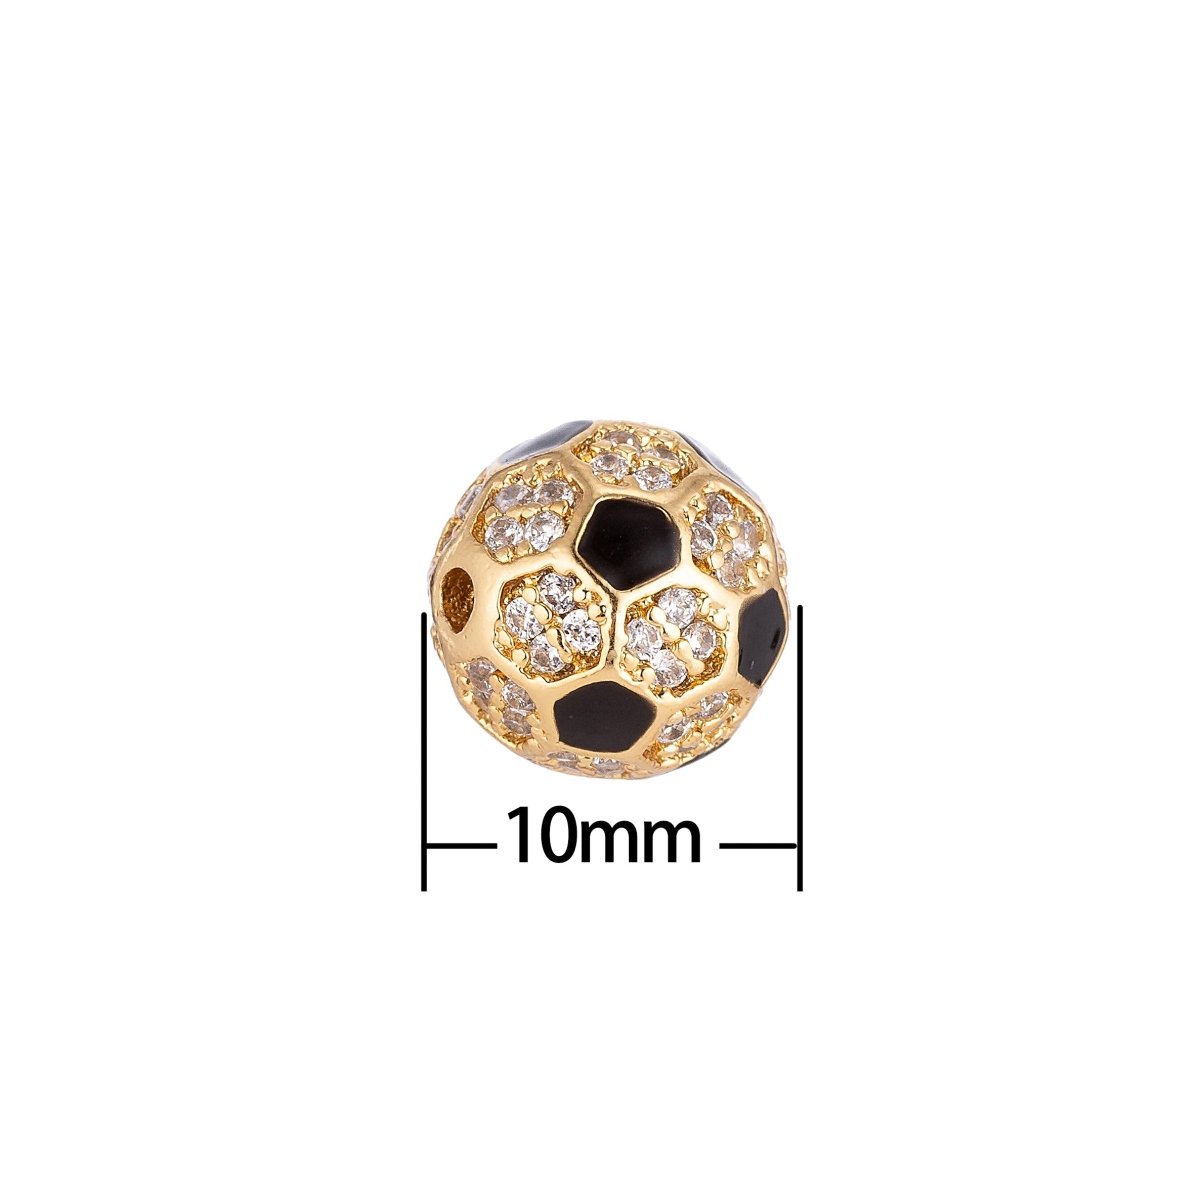 On Sale! CLEARANCE! 10mm 18K Gold Filled Micro Paved Soccer Ball Bead | B-025 - DLUXCA